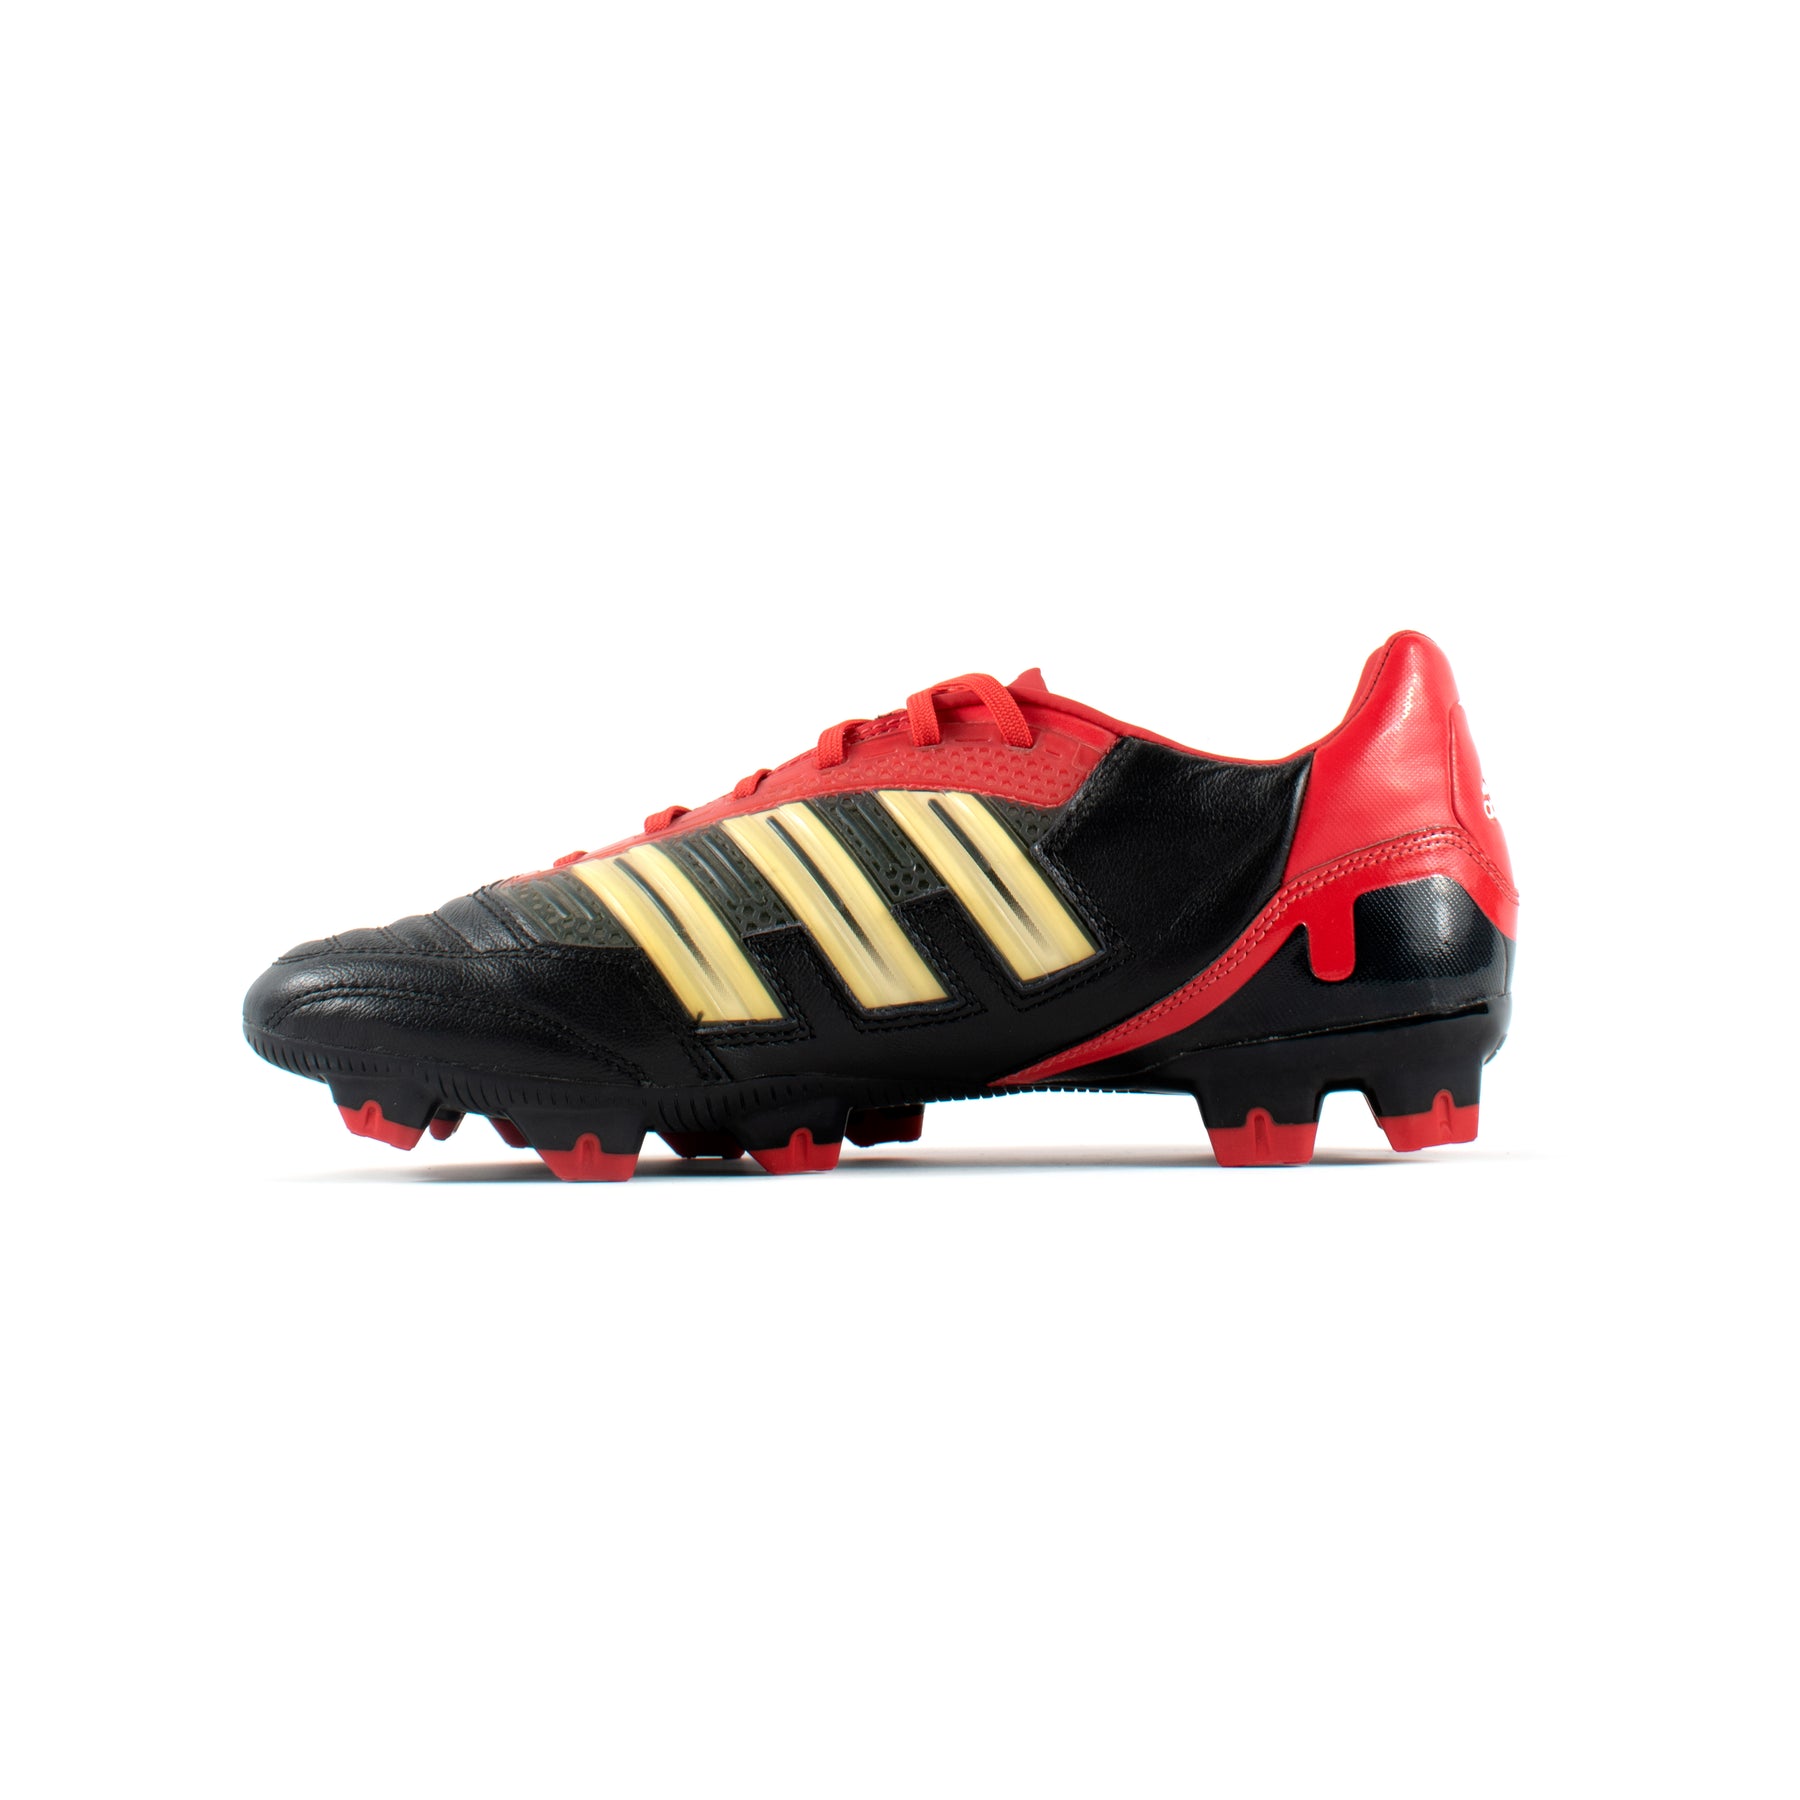 Adidas Predator Absolion Black Red FG – Classic Soccer Cleats